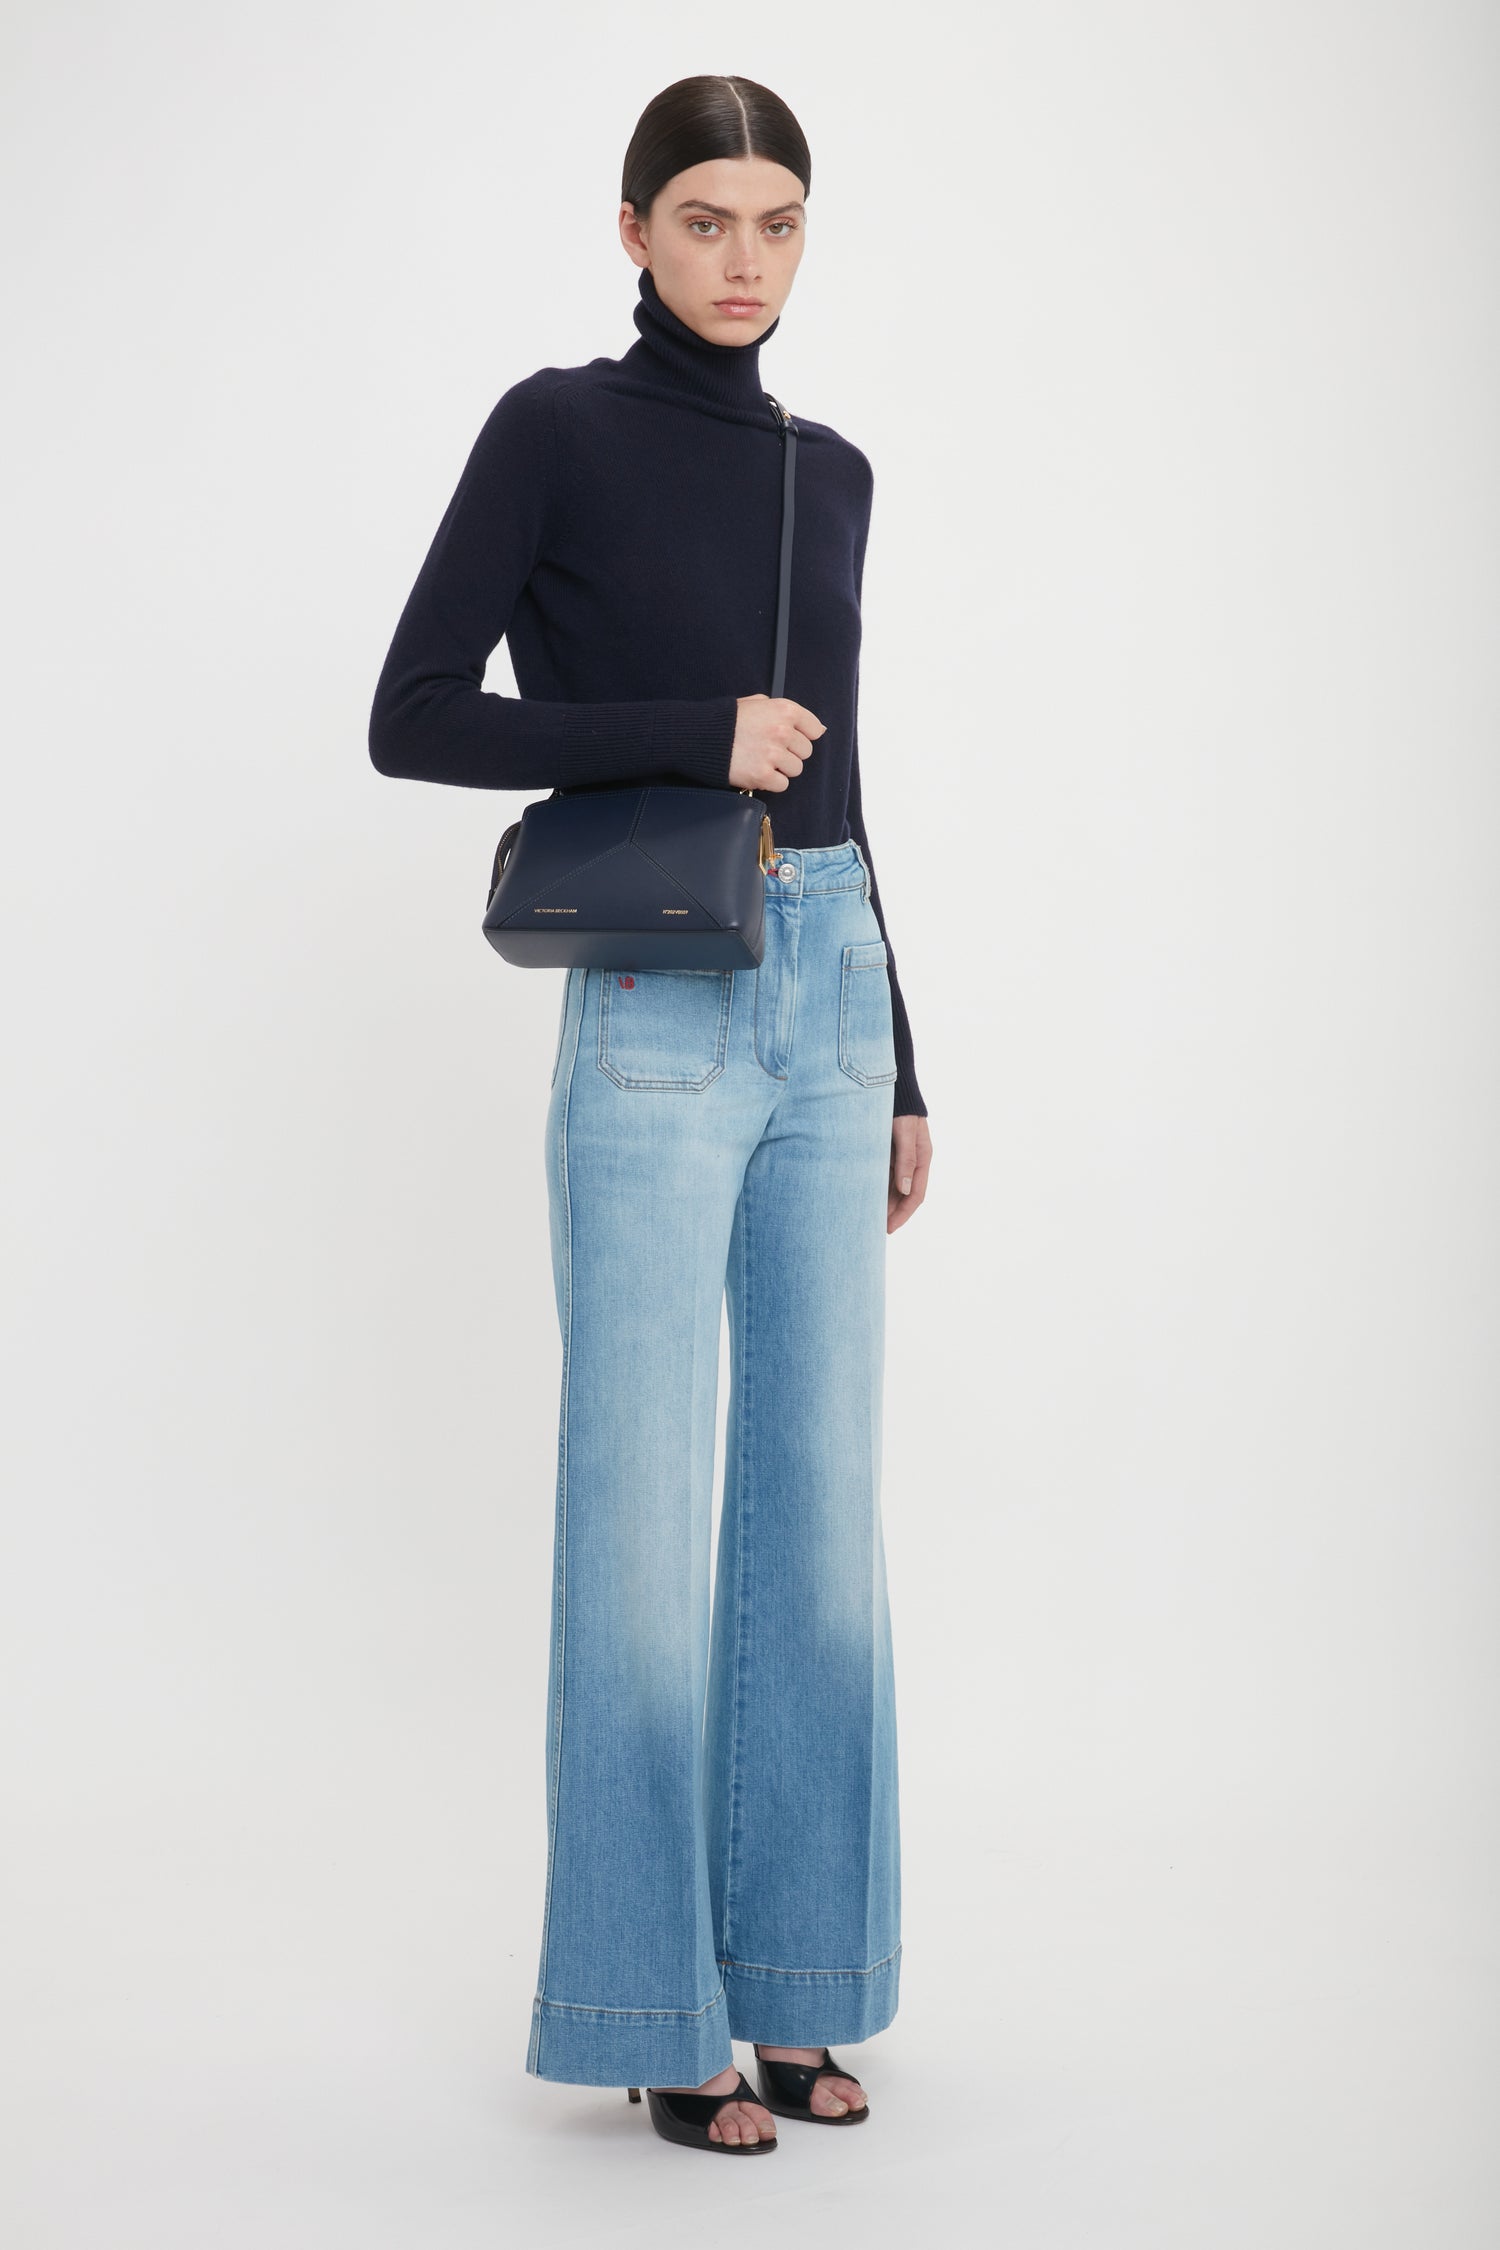 A person stands against a plain background wearing a black turtleneck, light blue wide-leg jeans, and black open-toe heels, holding the Exclusive Victoria Crossbody Bag In Navy Leather by Victoria Beckham over the shoulder.